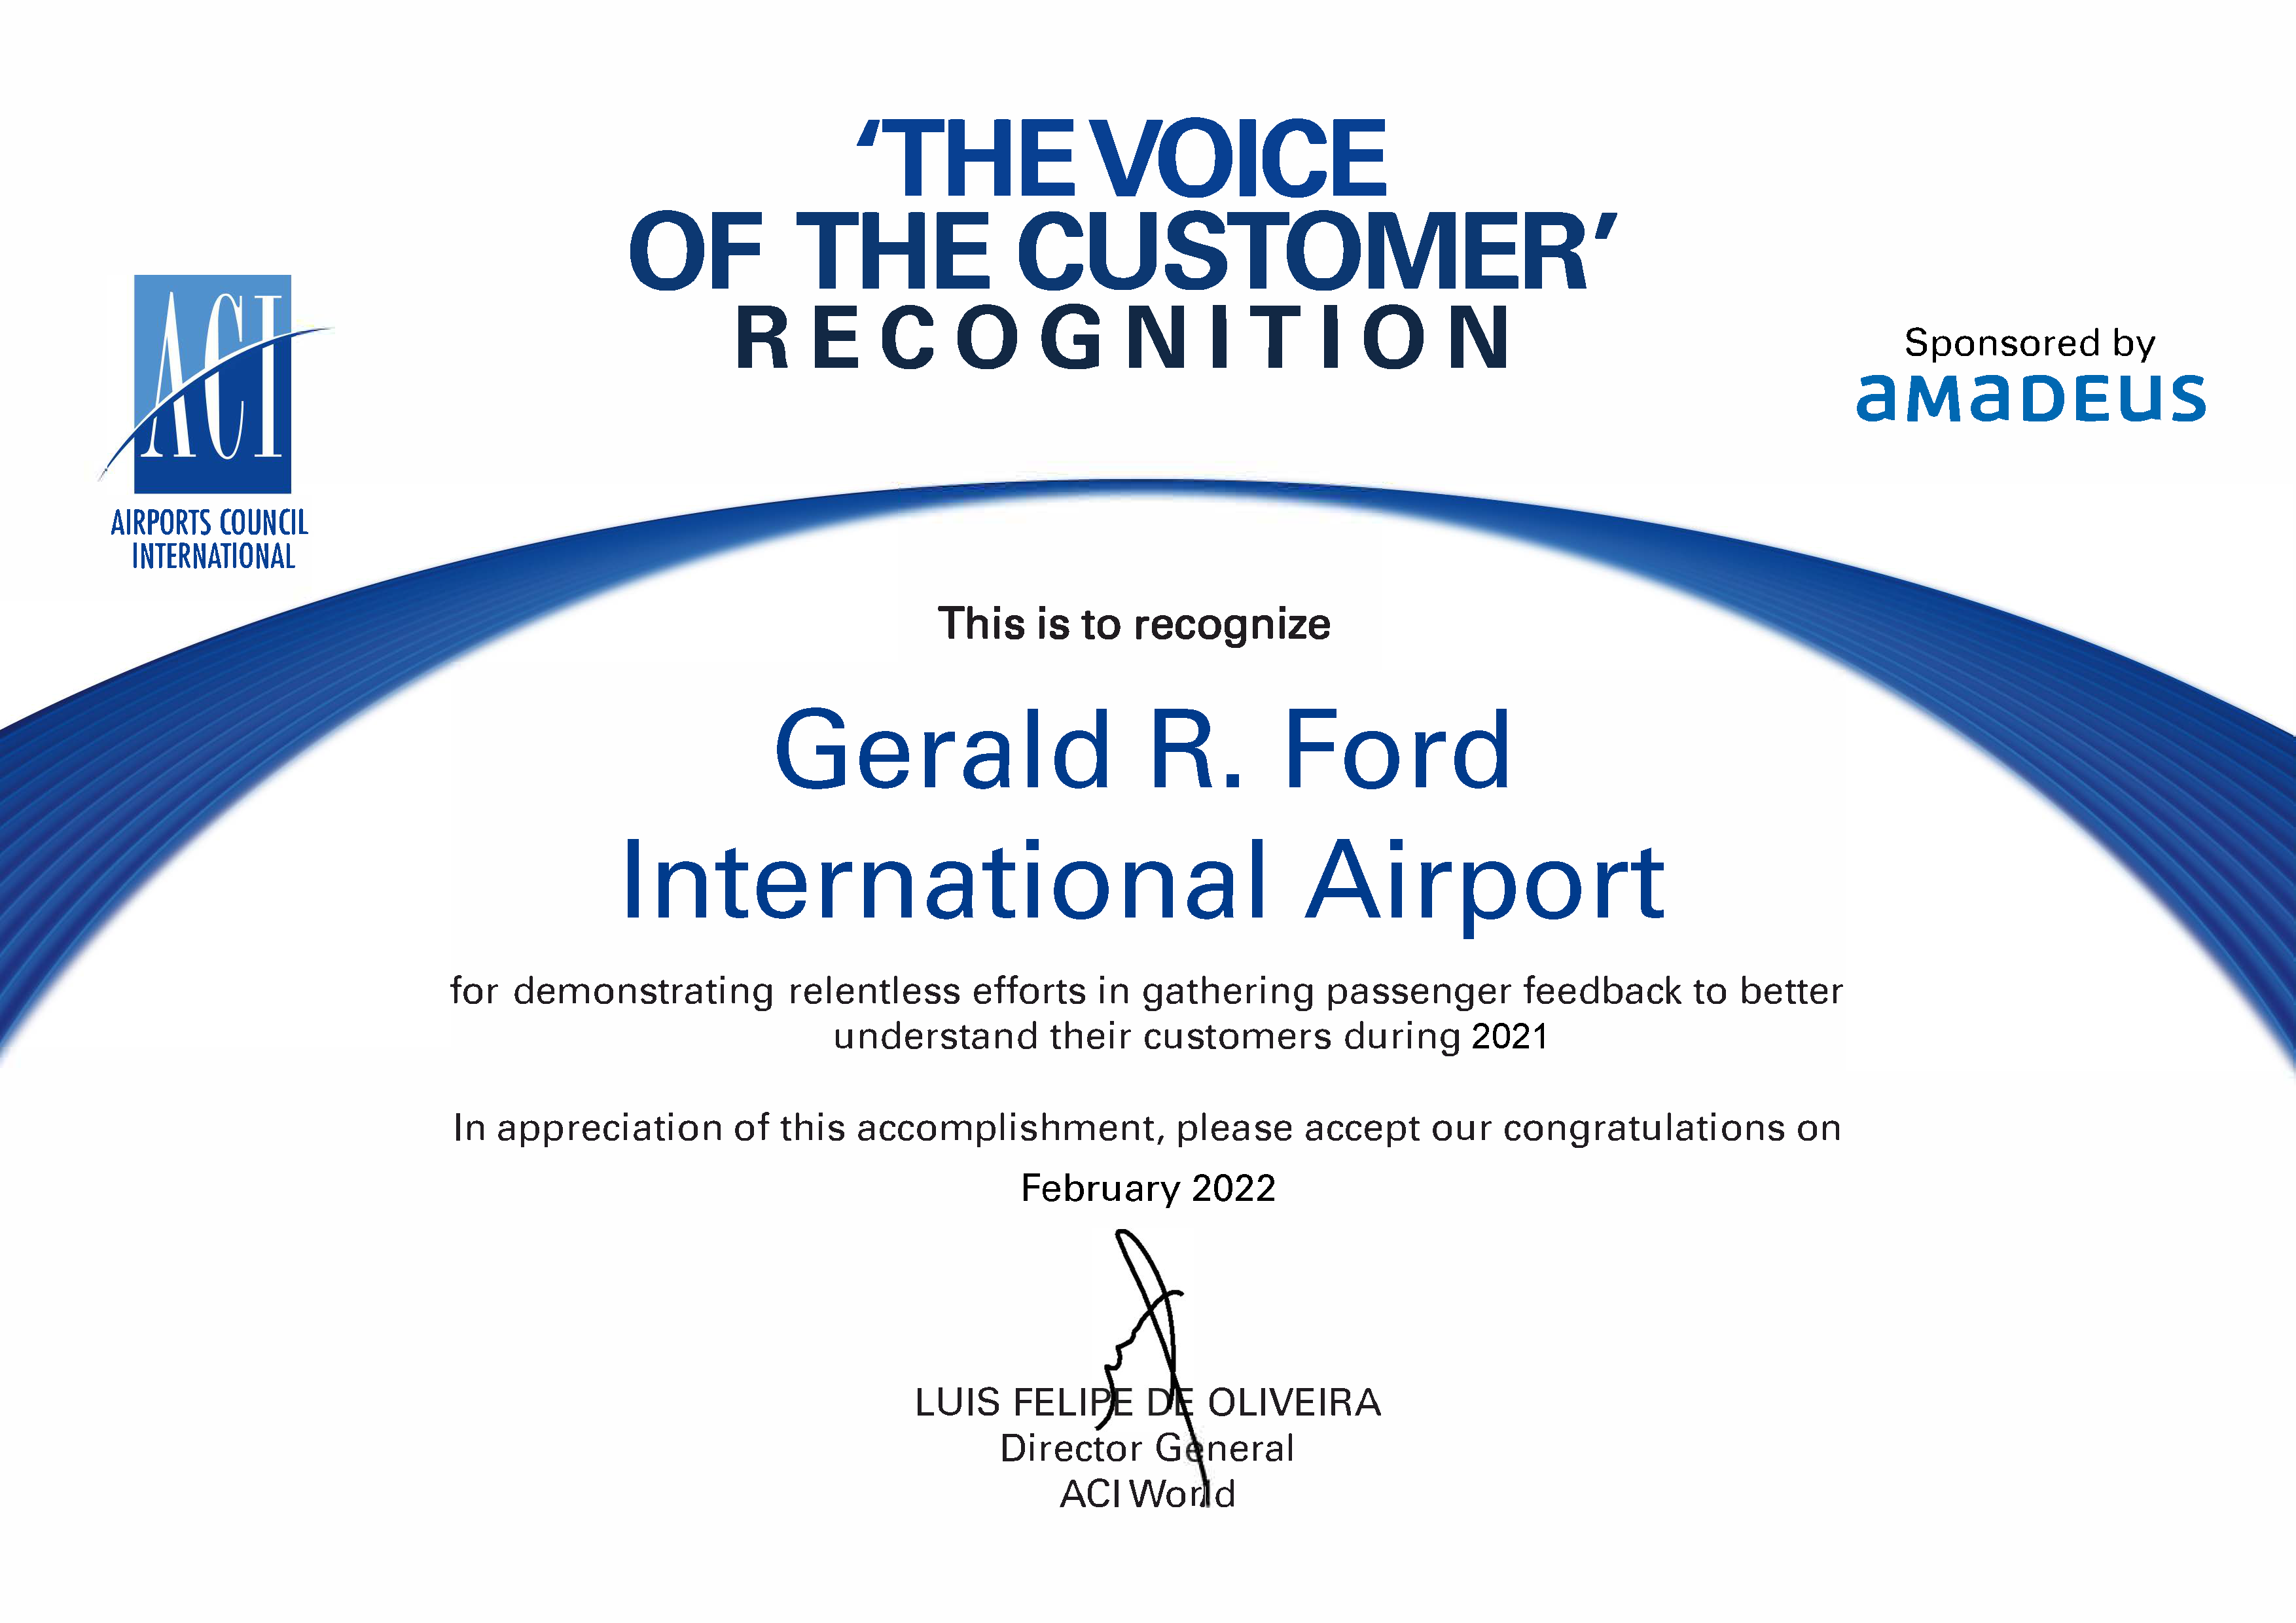 Ford International Airport Recognized for ACI World's 'Voice of the Customer' Initiative